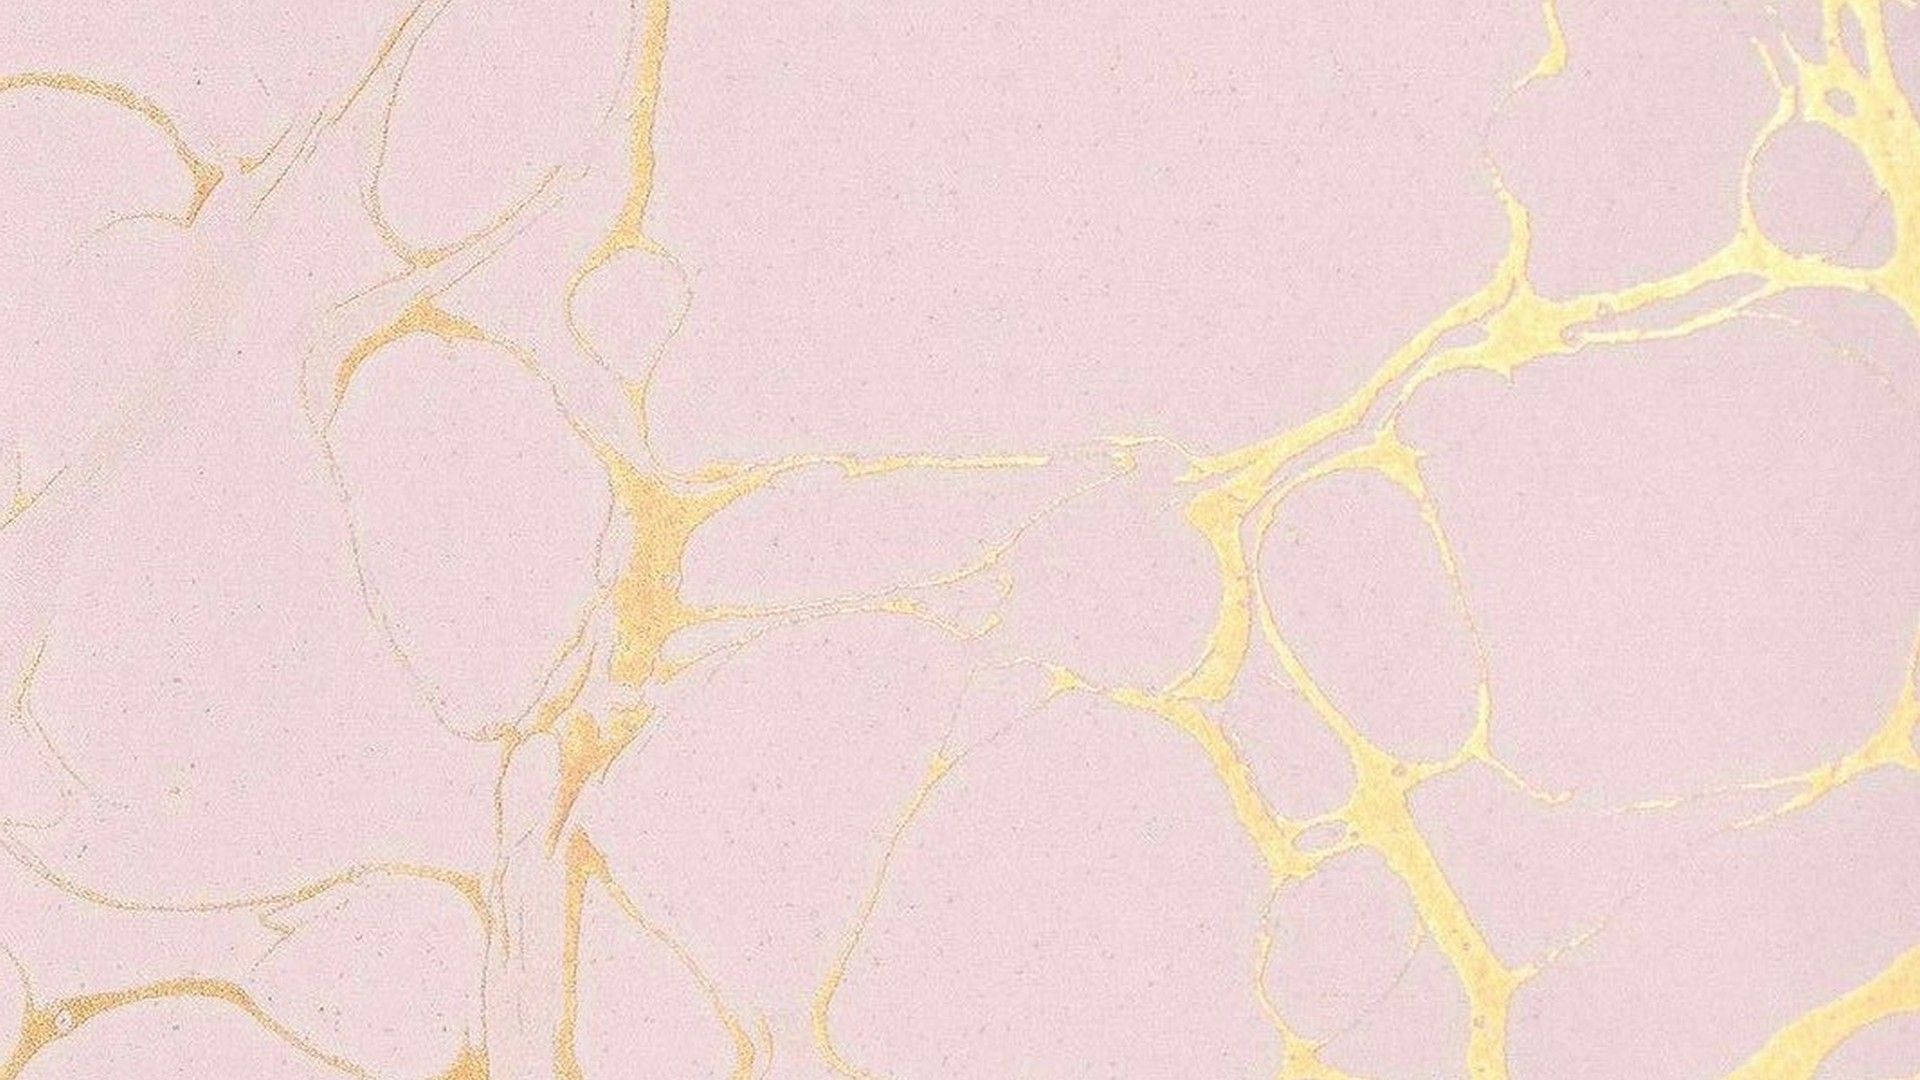 Aesthetic Marble Design Pink And Gold Background